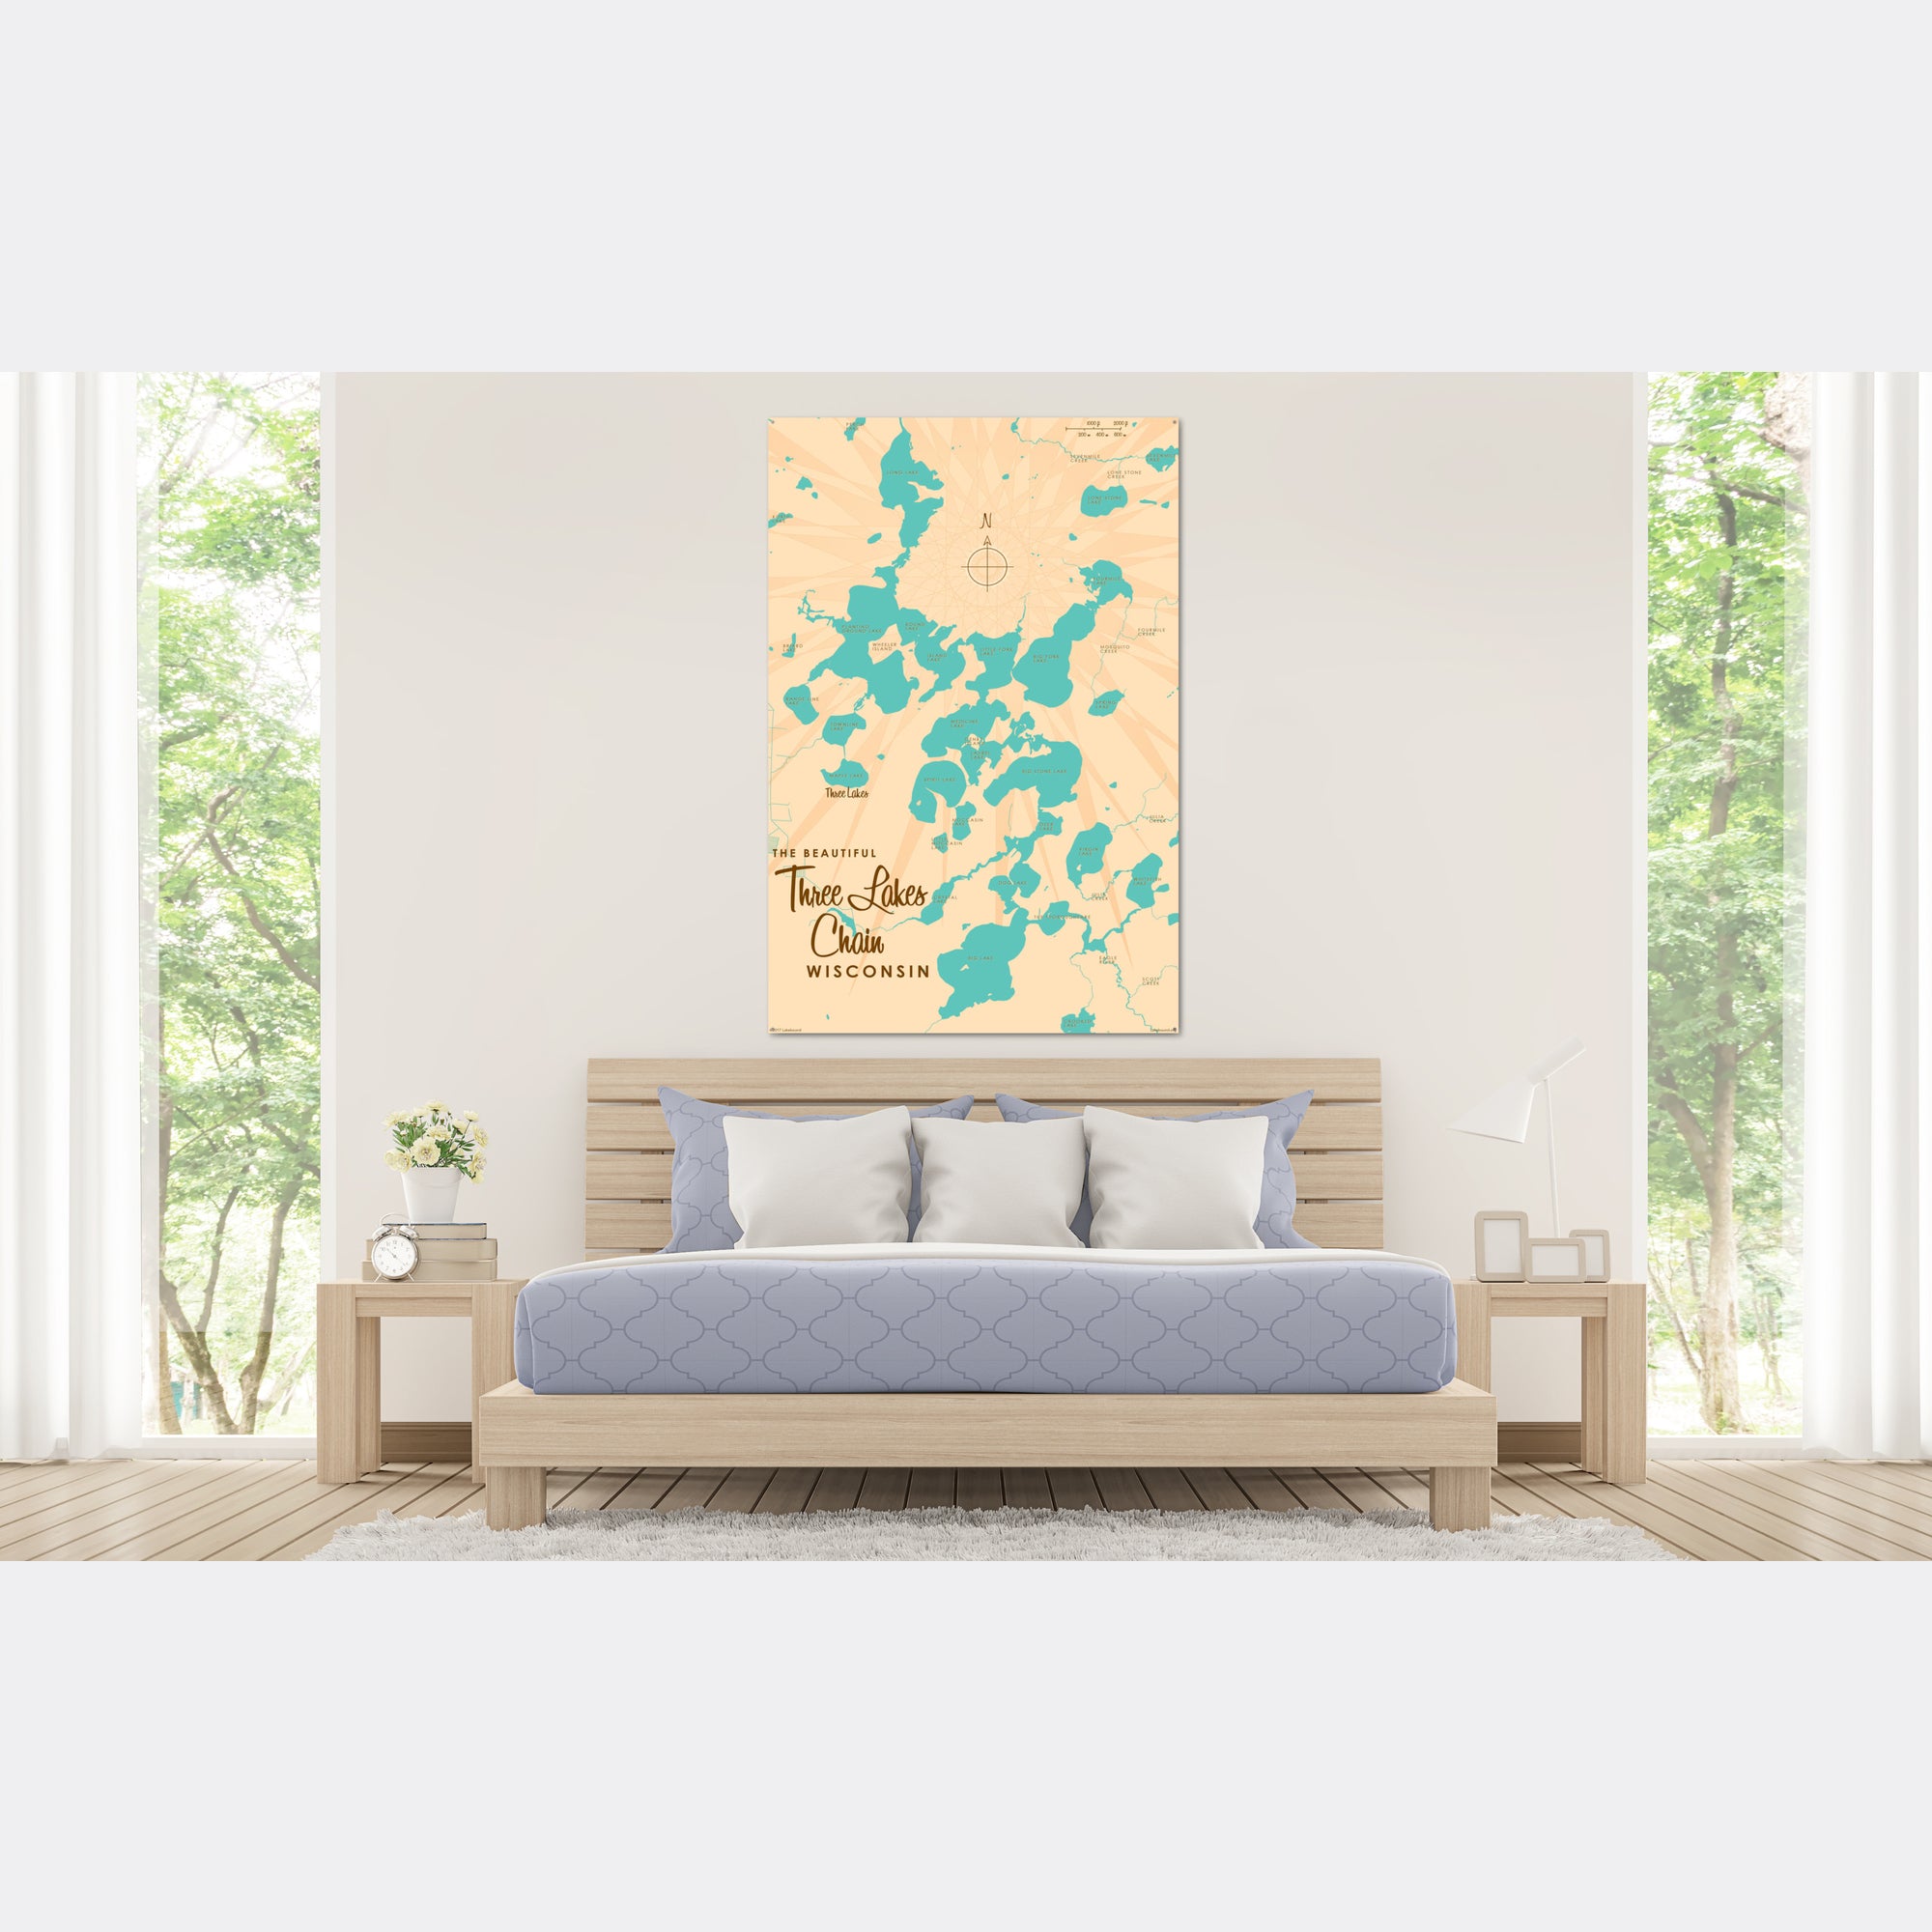 Three Lakes Chain Wisconsin, Metal Sign Map Art